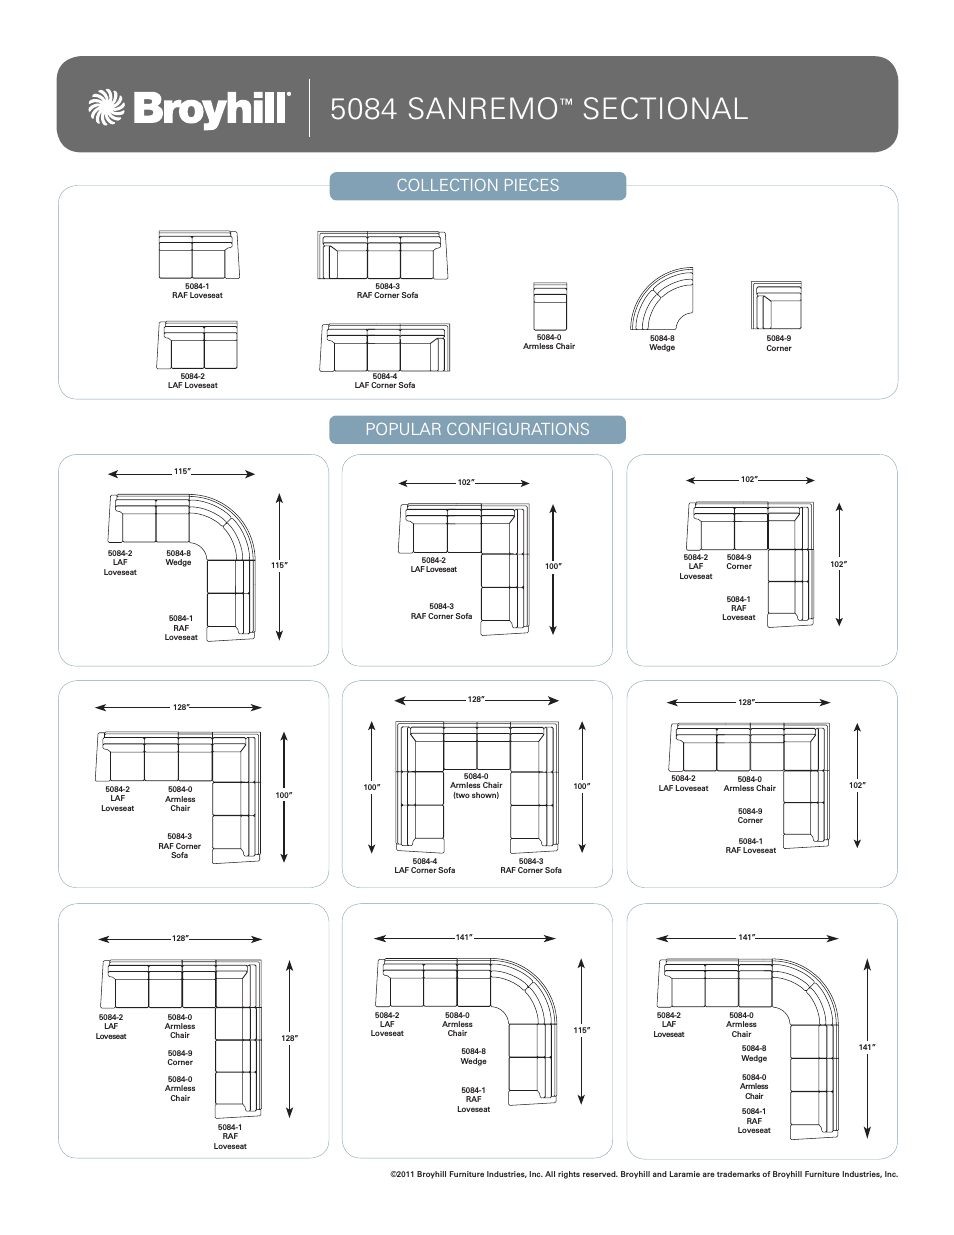 SANREMO SECTIONAL Configurations